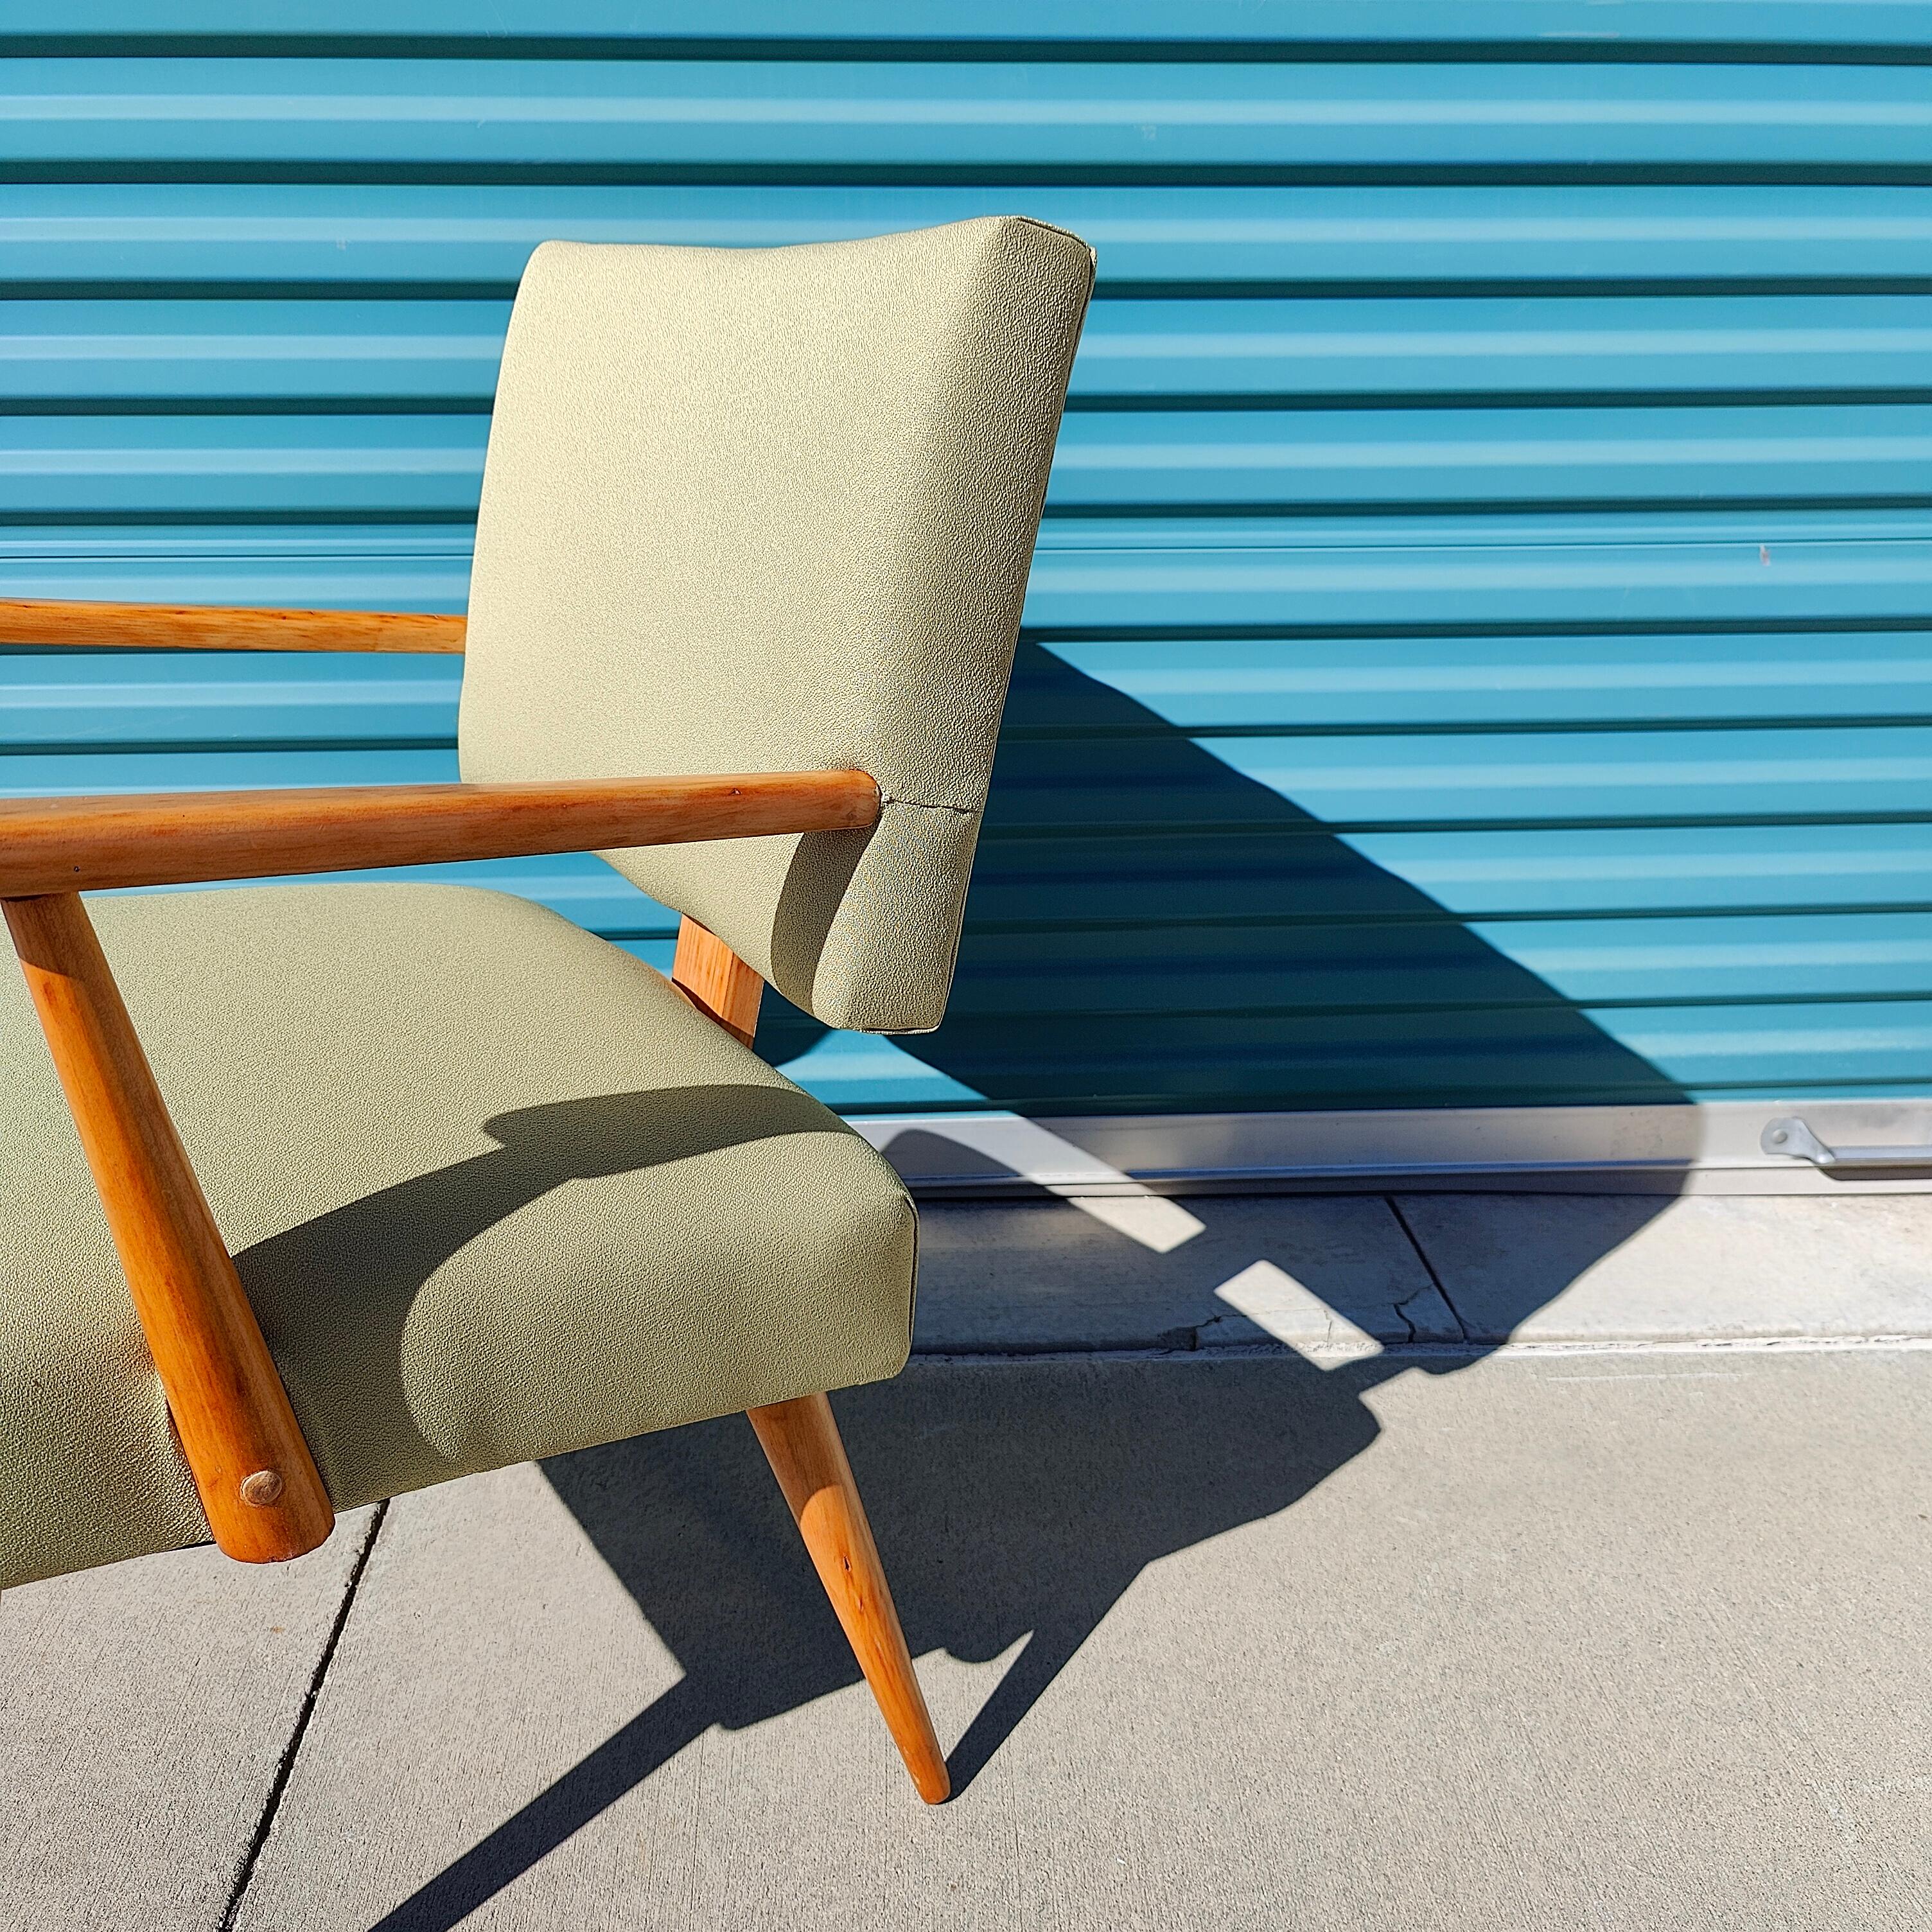 Small Vintage Mid-Century Modern Lounge Chair In Excellent Condition For Sale In Chino Hills, CA